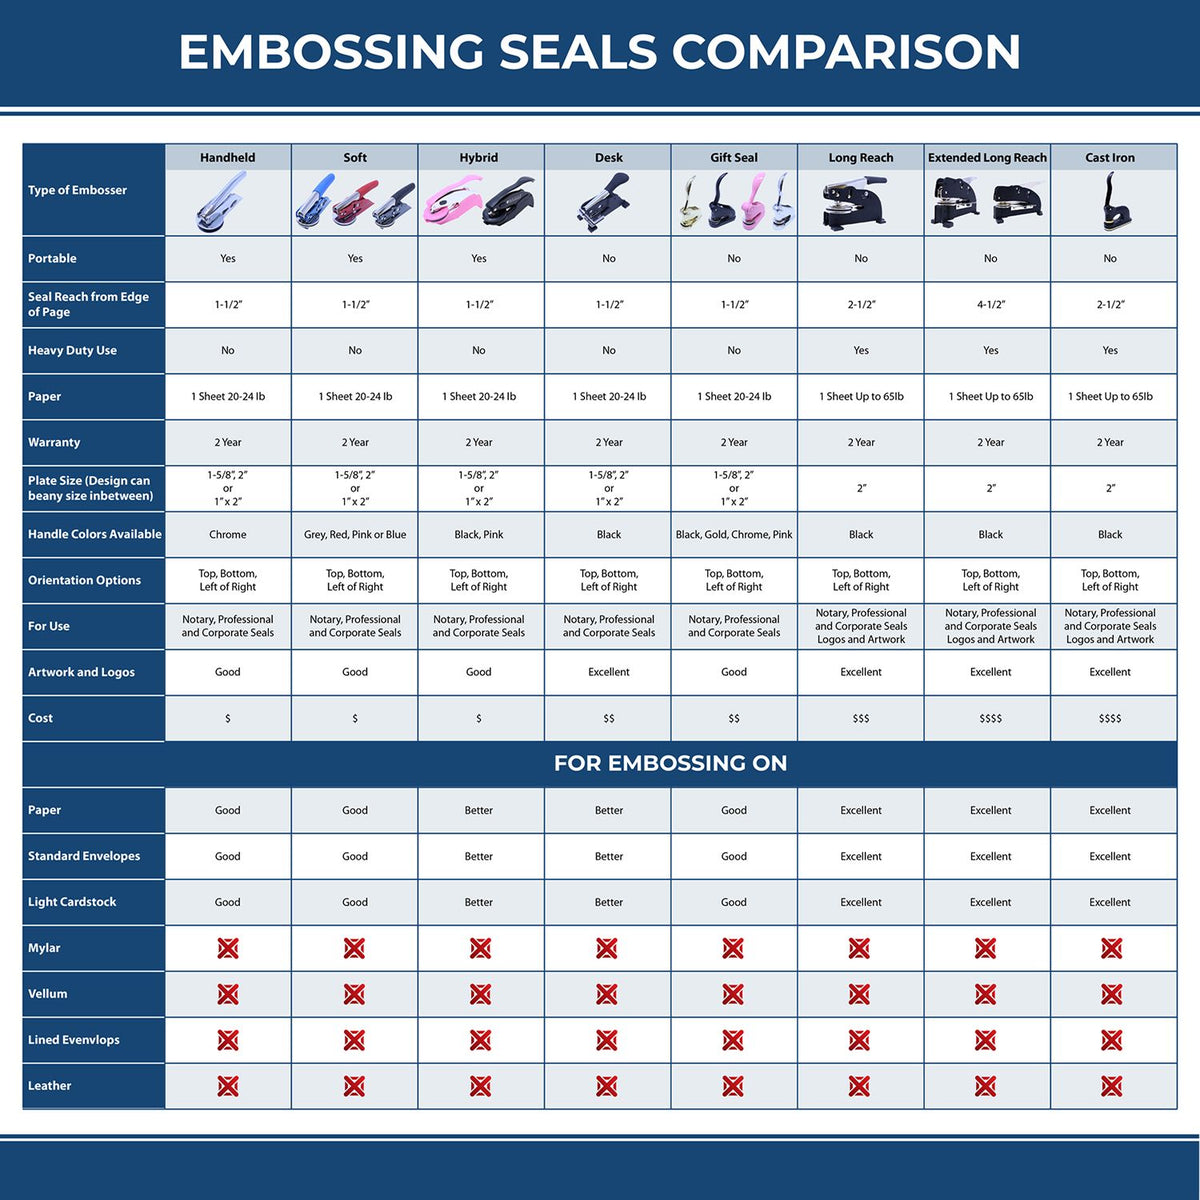 A comparison chart for the different types of mount models available for the Handheld Texas Professional Geologist Embosser